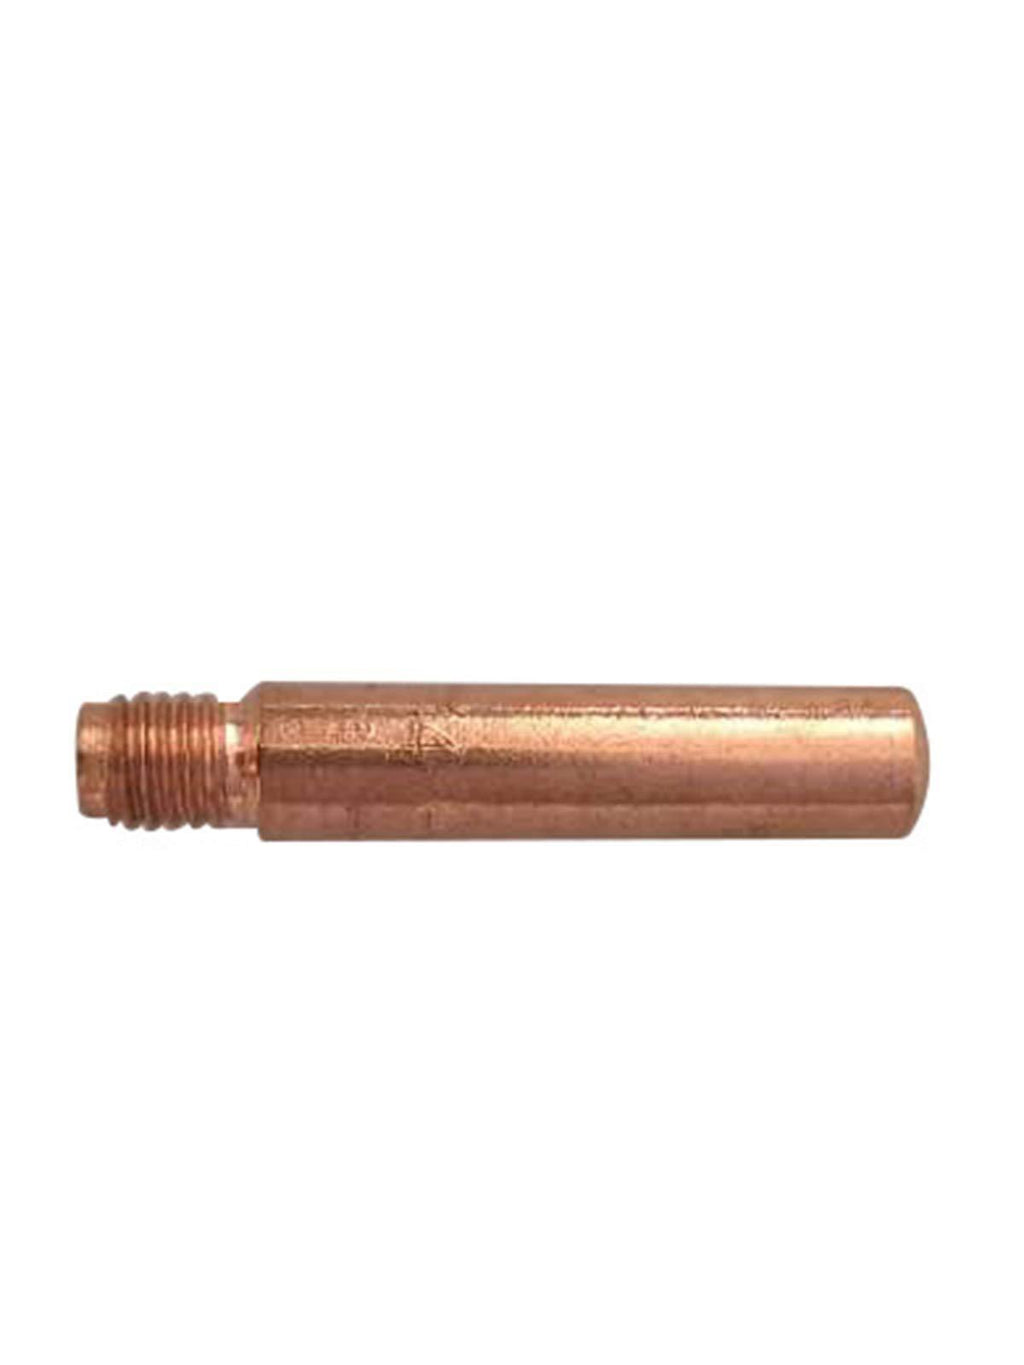 MIG Welding Contact Tip 14H45,Pack of 20 - NewNest Australia